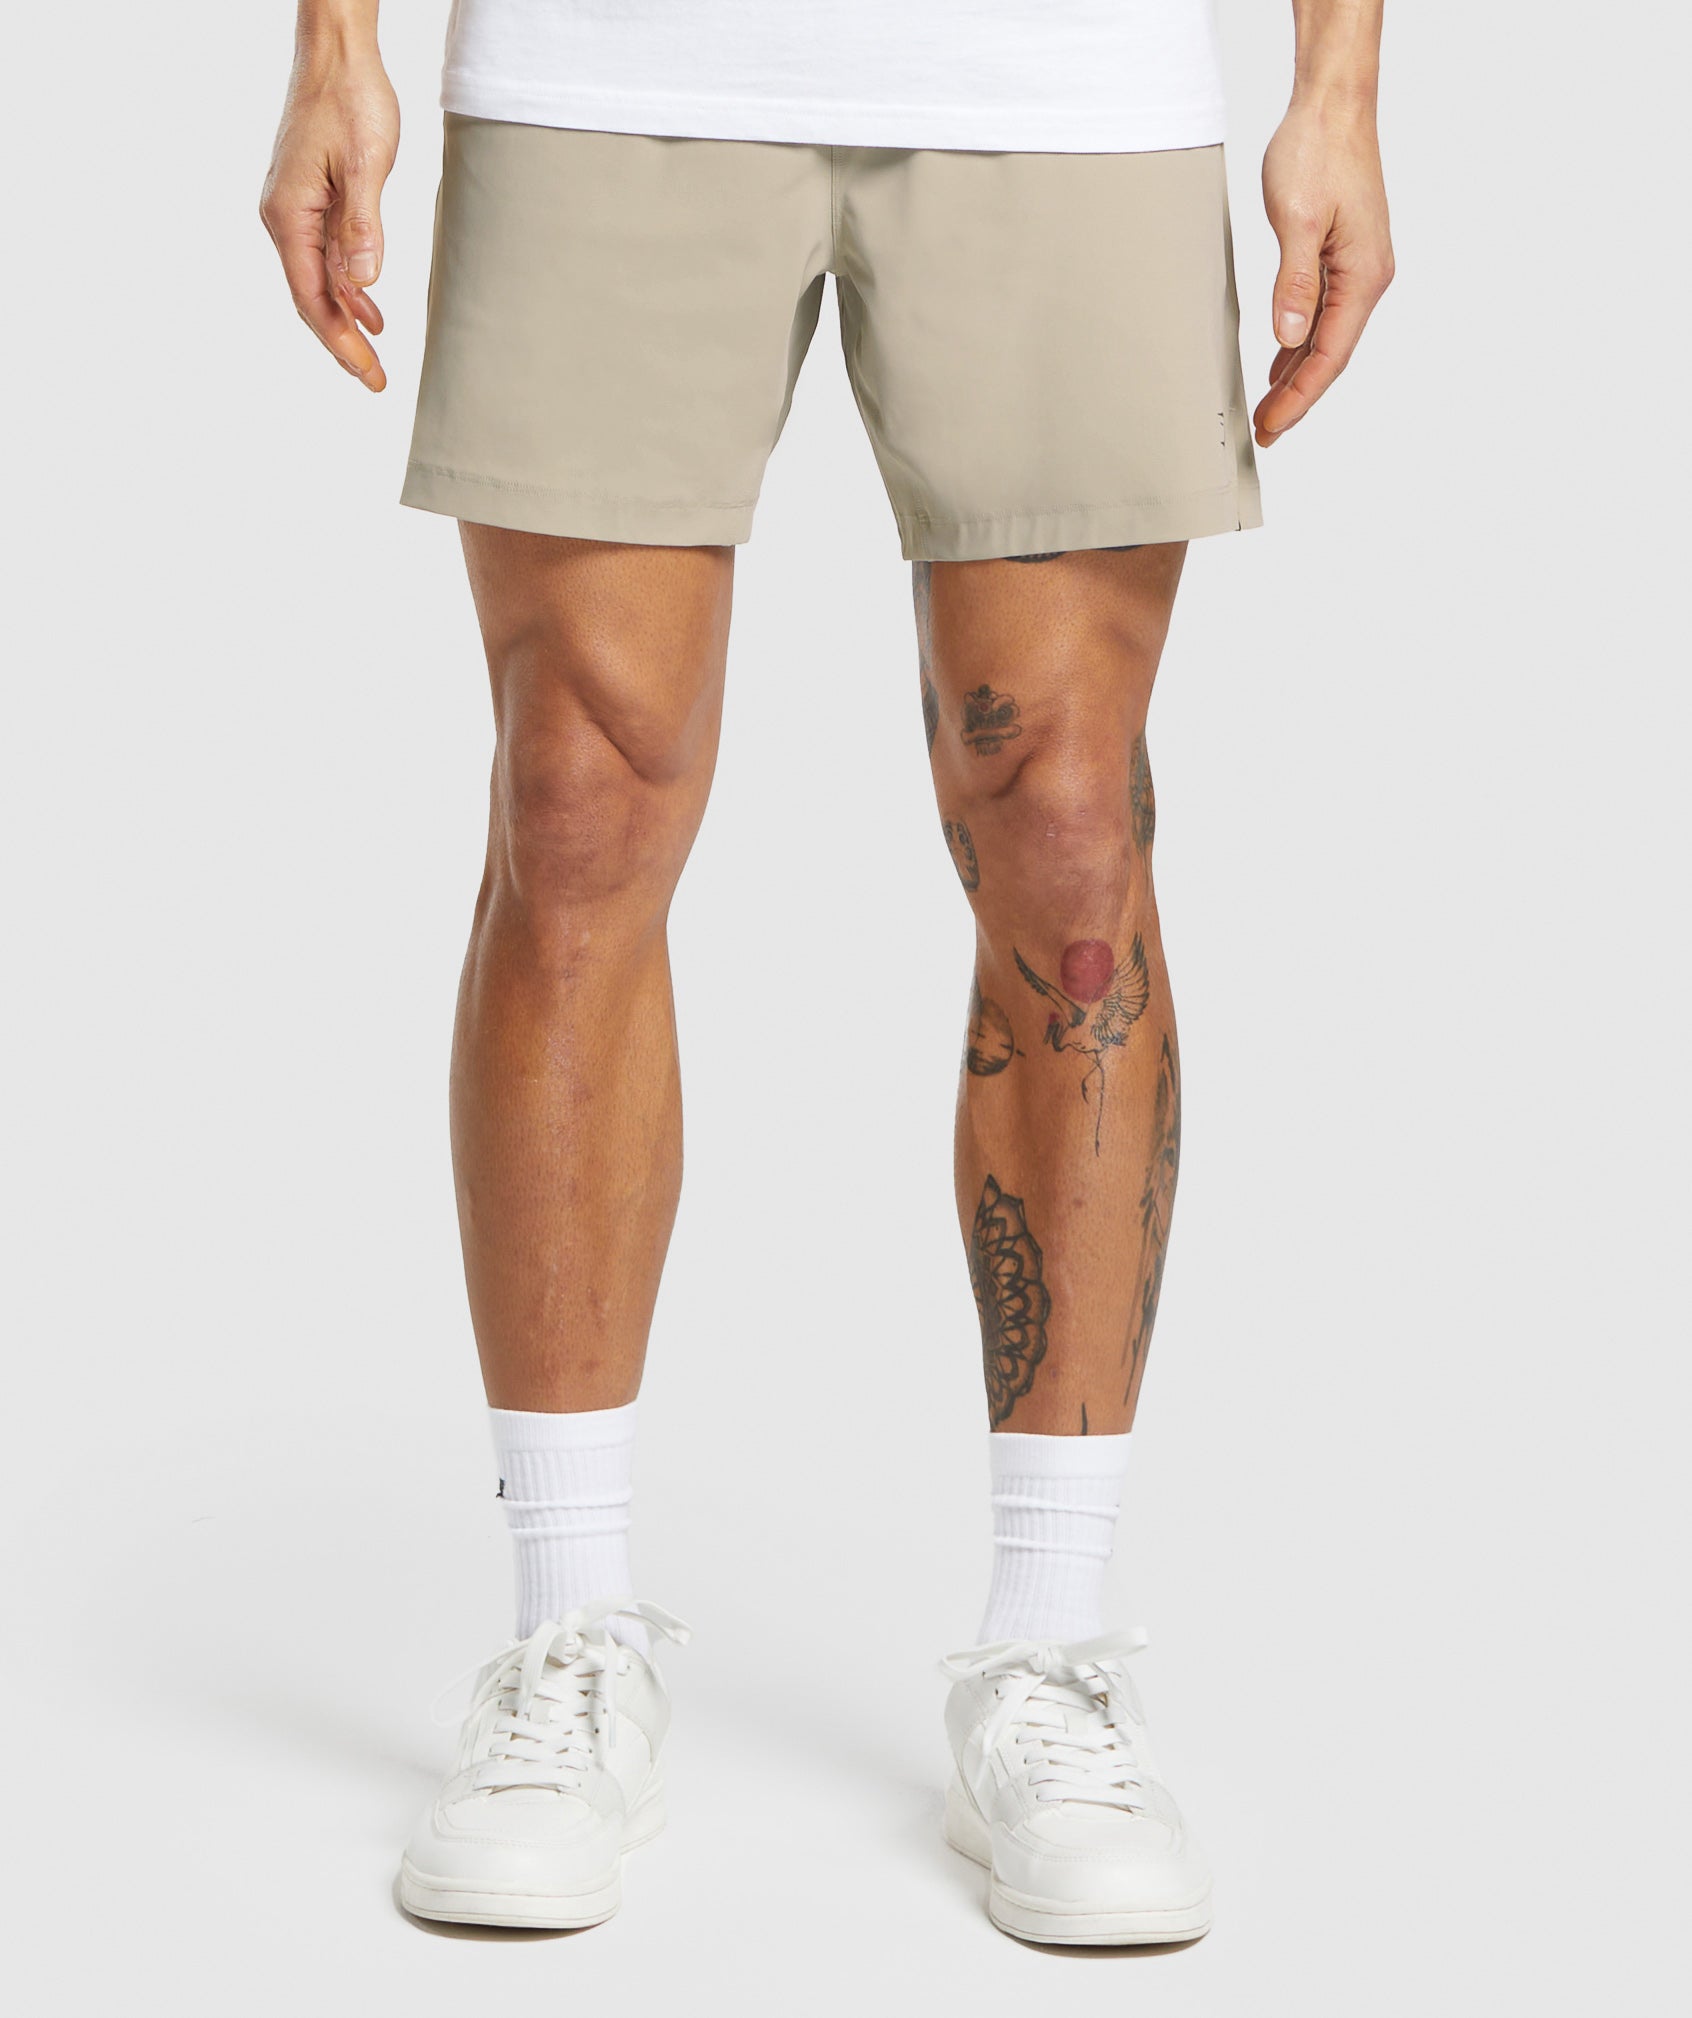 Studio Shorts in Sand Brown is out of stock